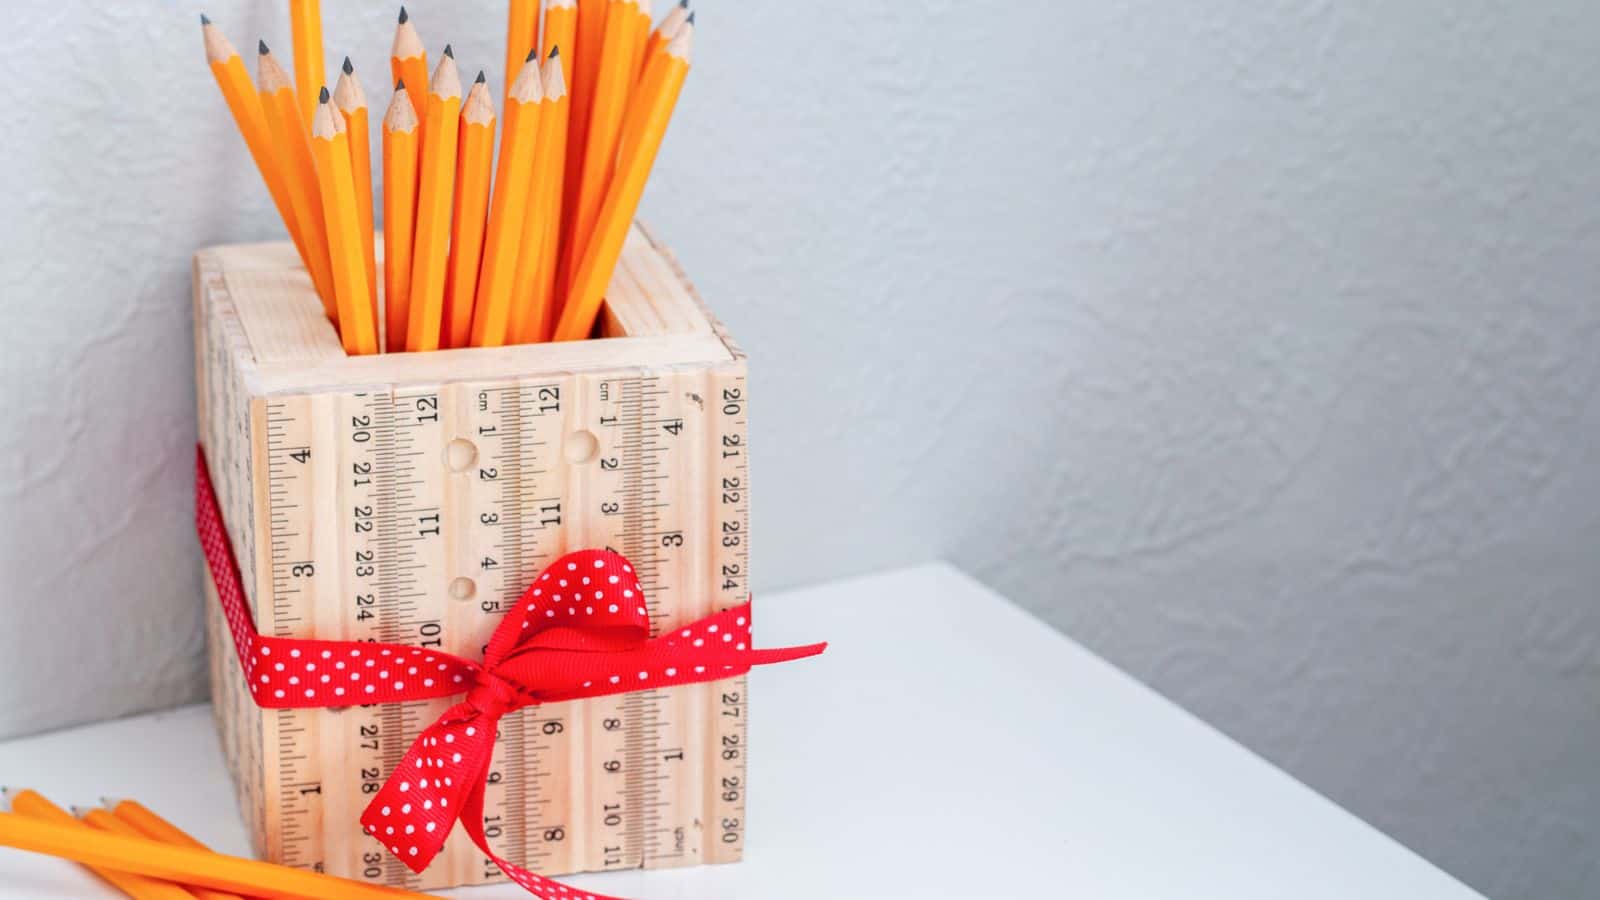 <p>This fun wood craft for kids is the perfect teacher gift. 15″ of scrap wood and a bunch of rulers is all you need to make a ruler pencil holder. Make the box with basic tools and add the rulers using wood glue. Your kids will love this easy wood project and be proud to give it to their teacher. <a href="https://www.anikasdiylife.com/ruler-pencil-holder/">Step-by-step tutorial here.</a></p>